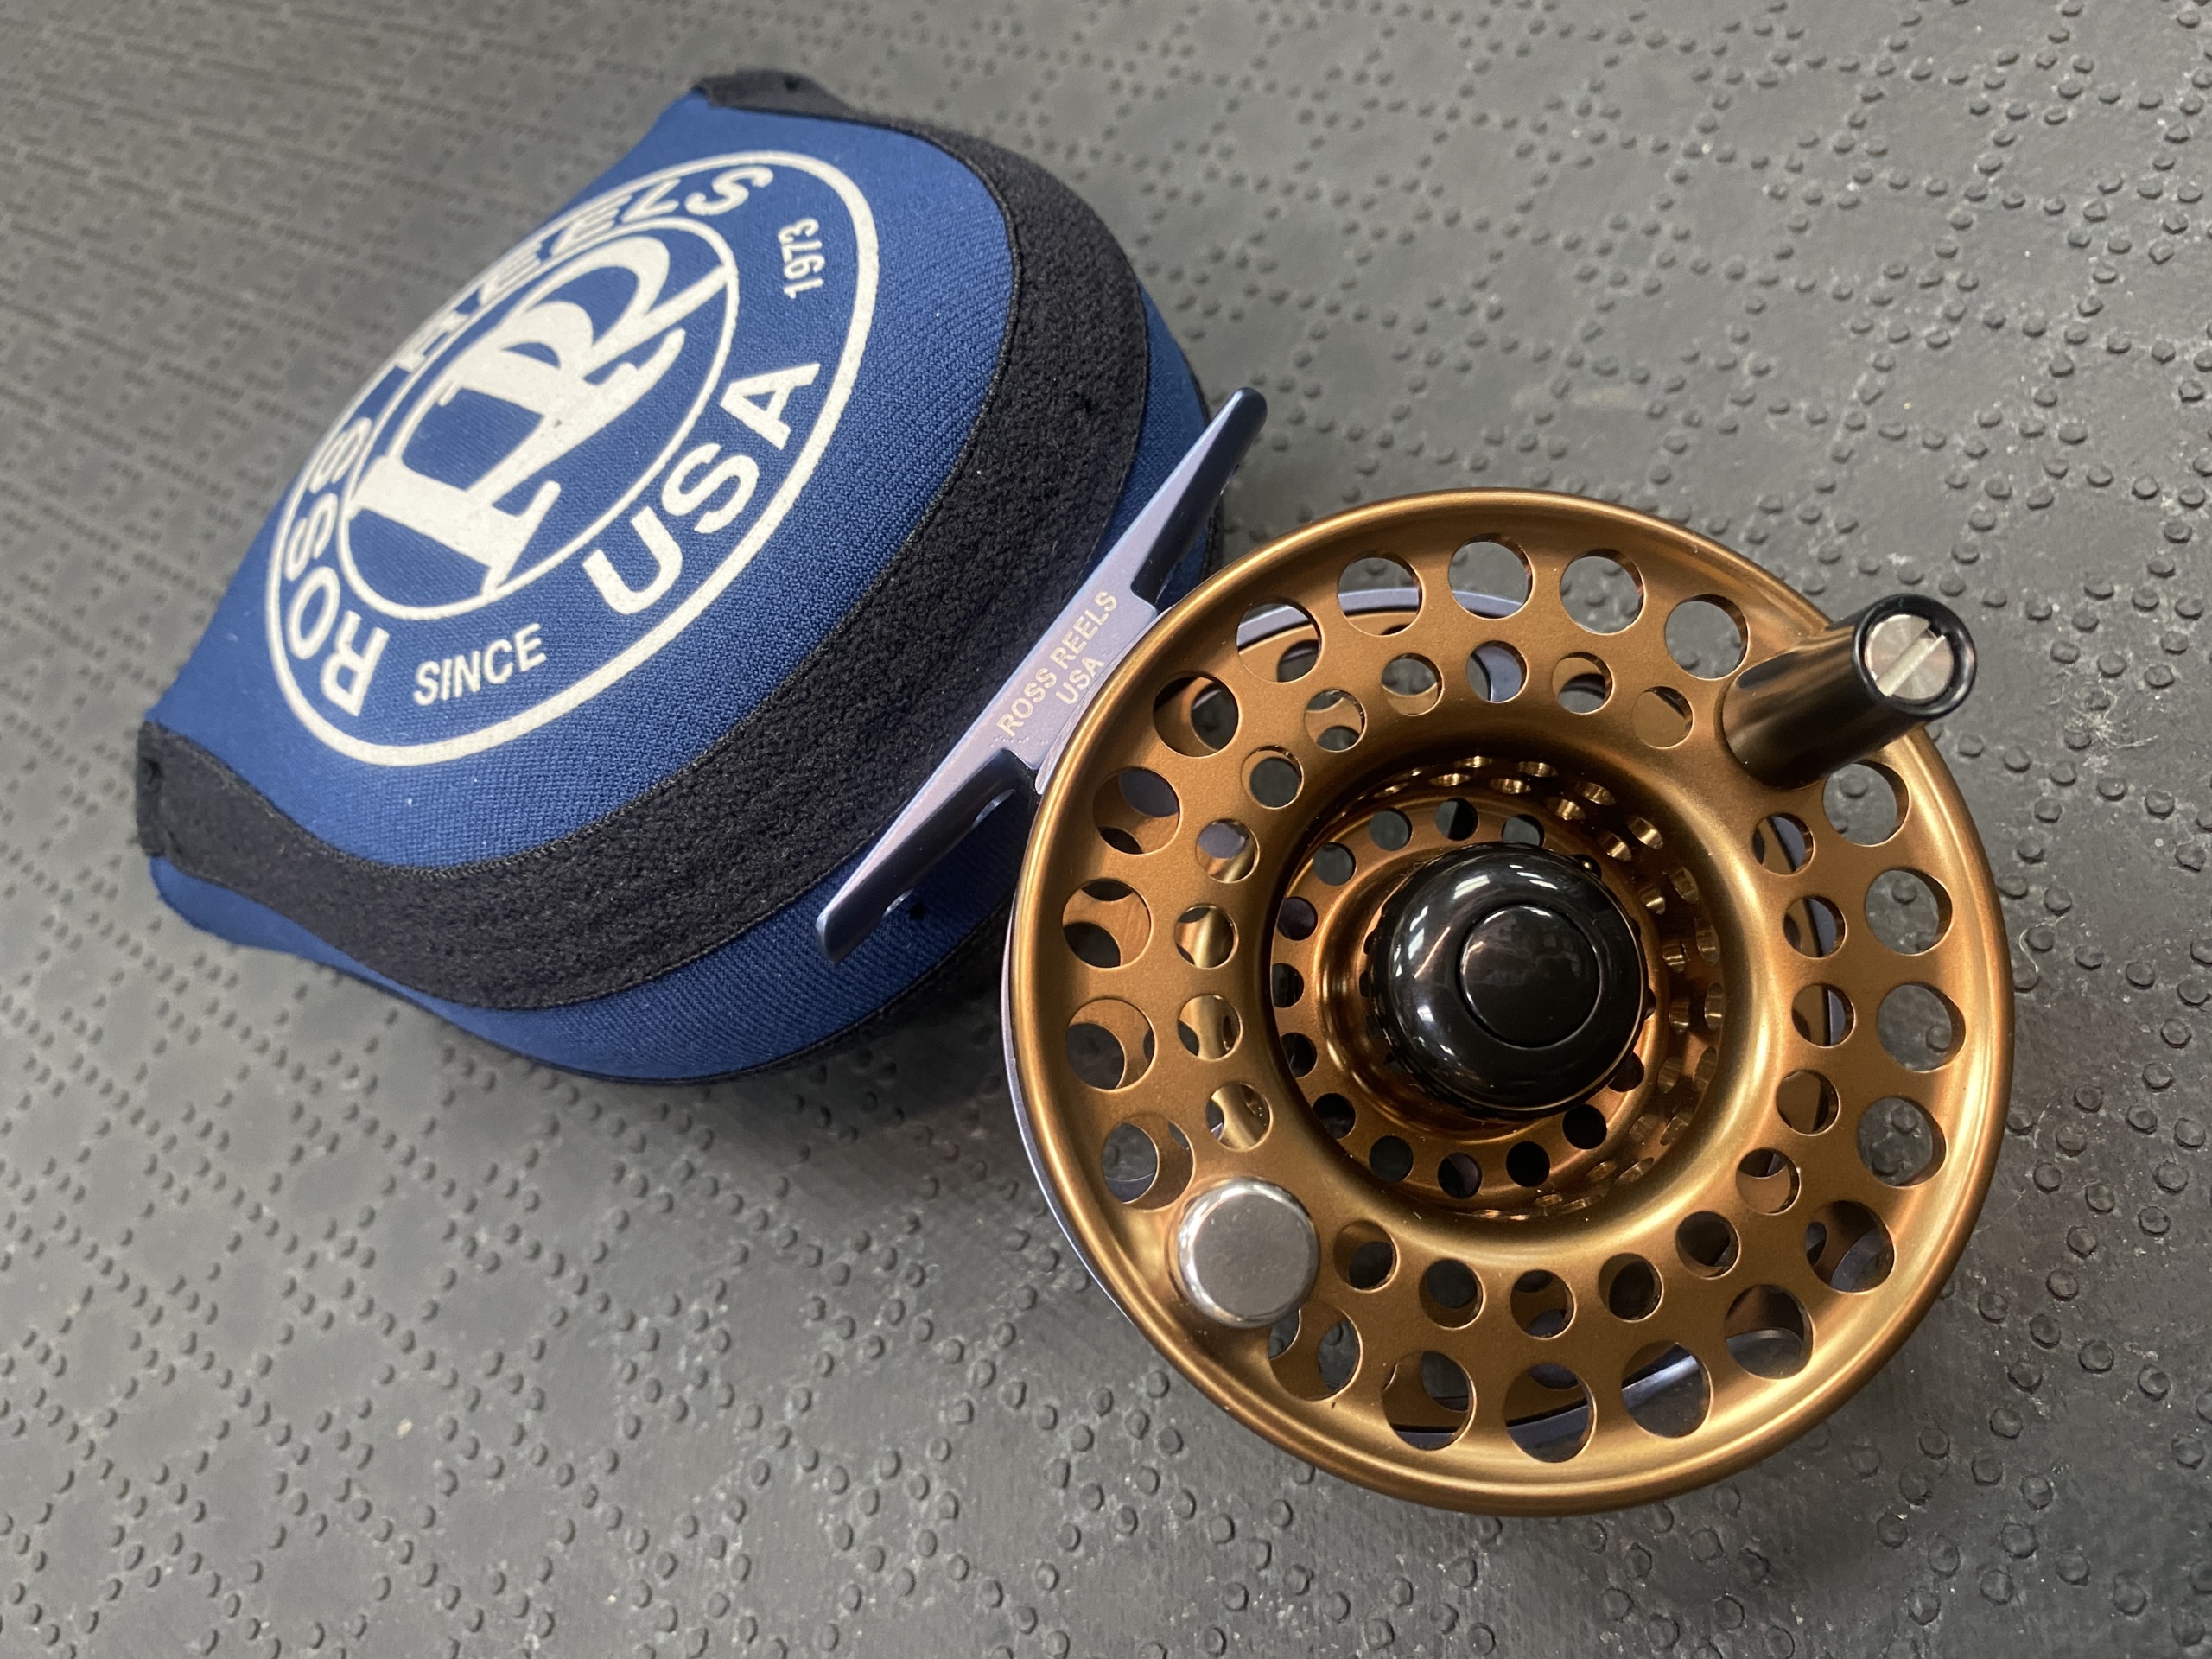 https://thefirstcast.ca/wp-content/uploads/2021/08/Ross-Evolution-Number-2-Fly-Reel-Blue-Copper-B-scaled.jpg